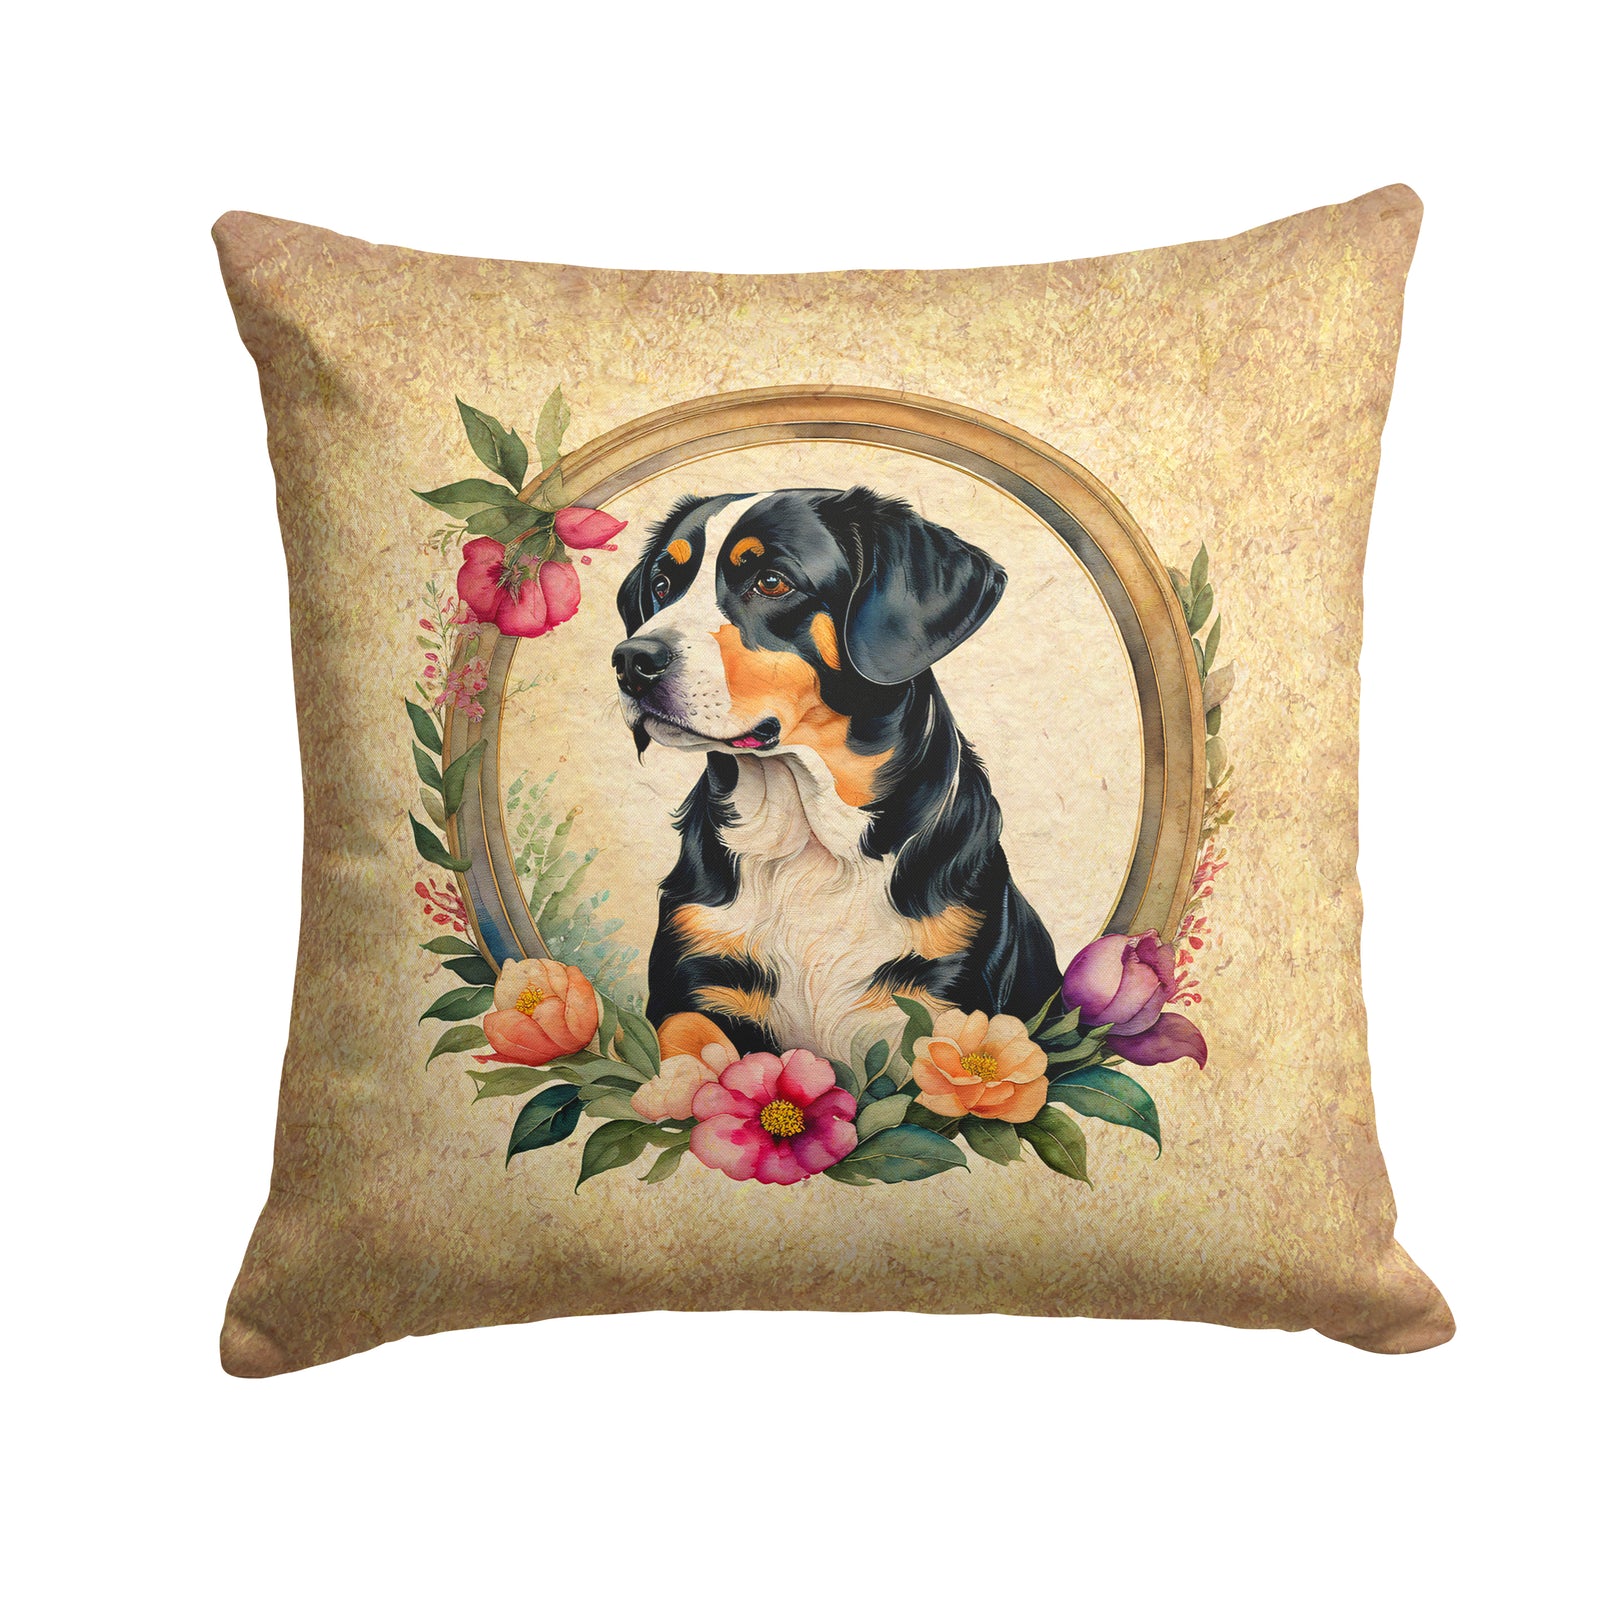 Buy this Entlebucher Mountain Dog and Flowers Fabric Decorative Pillow